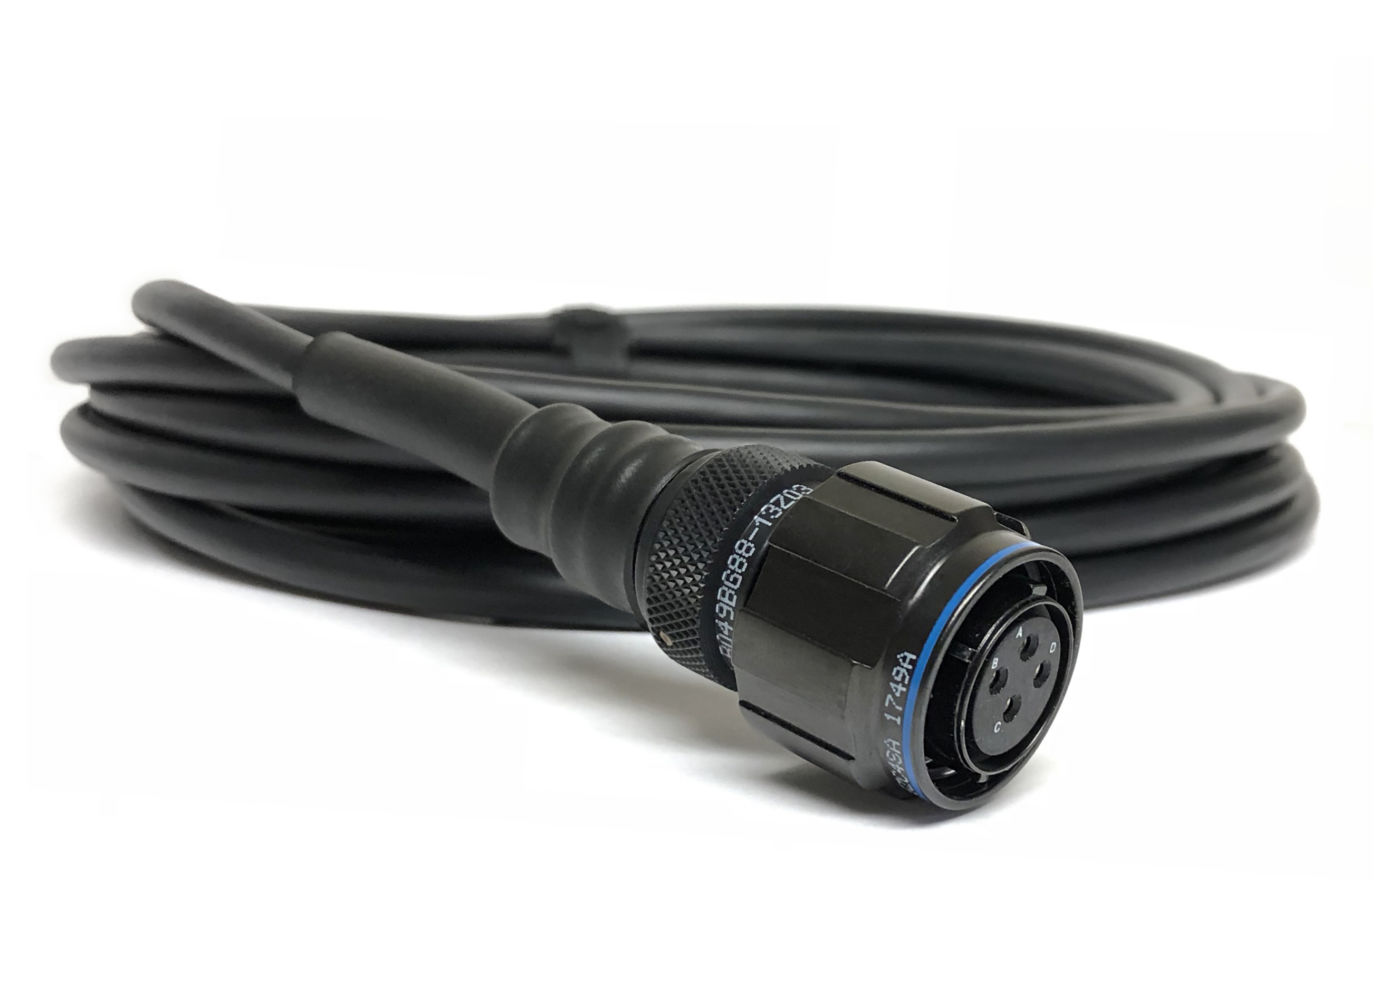 Metal Connector Power Cords - Peak Beam Systems, Inc.